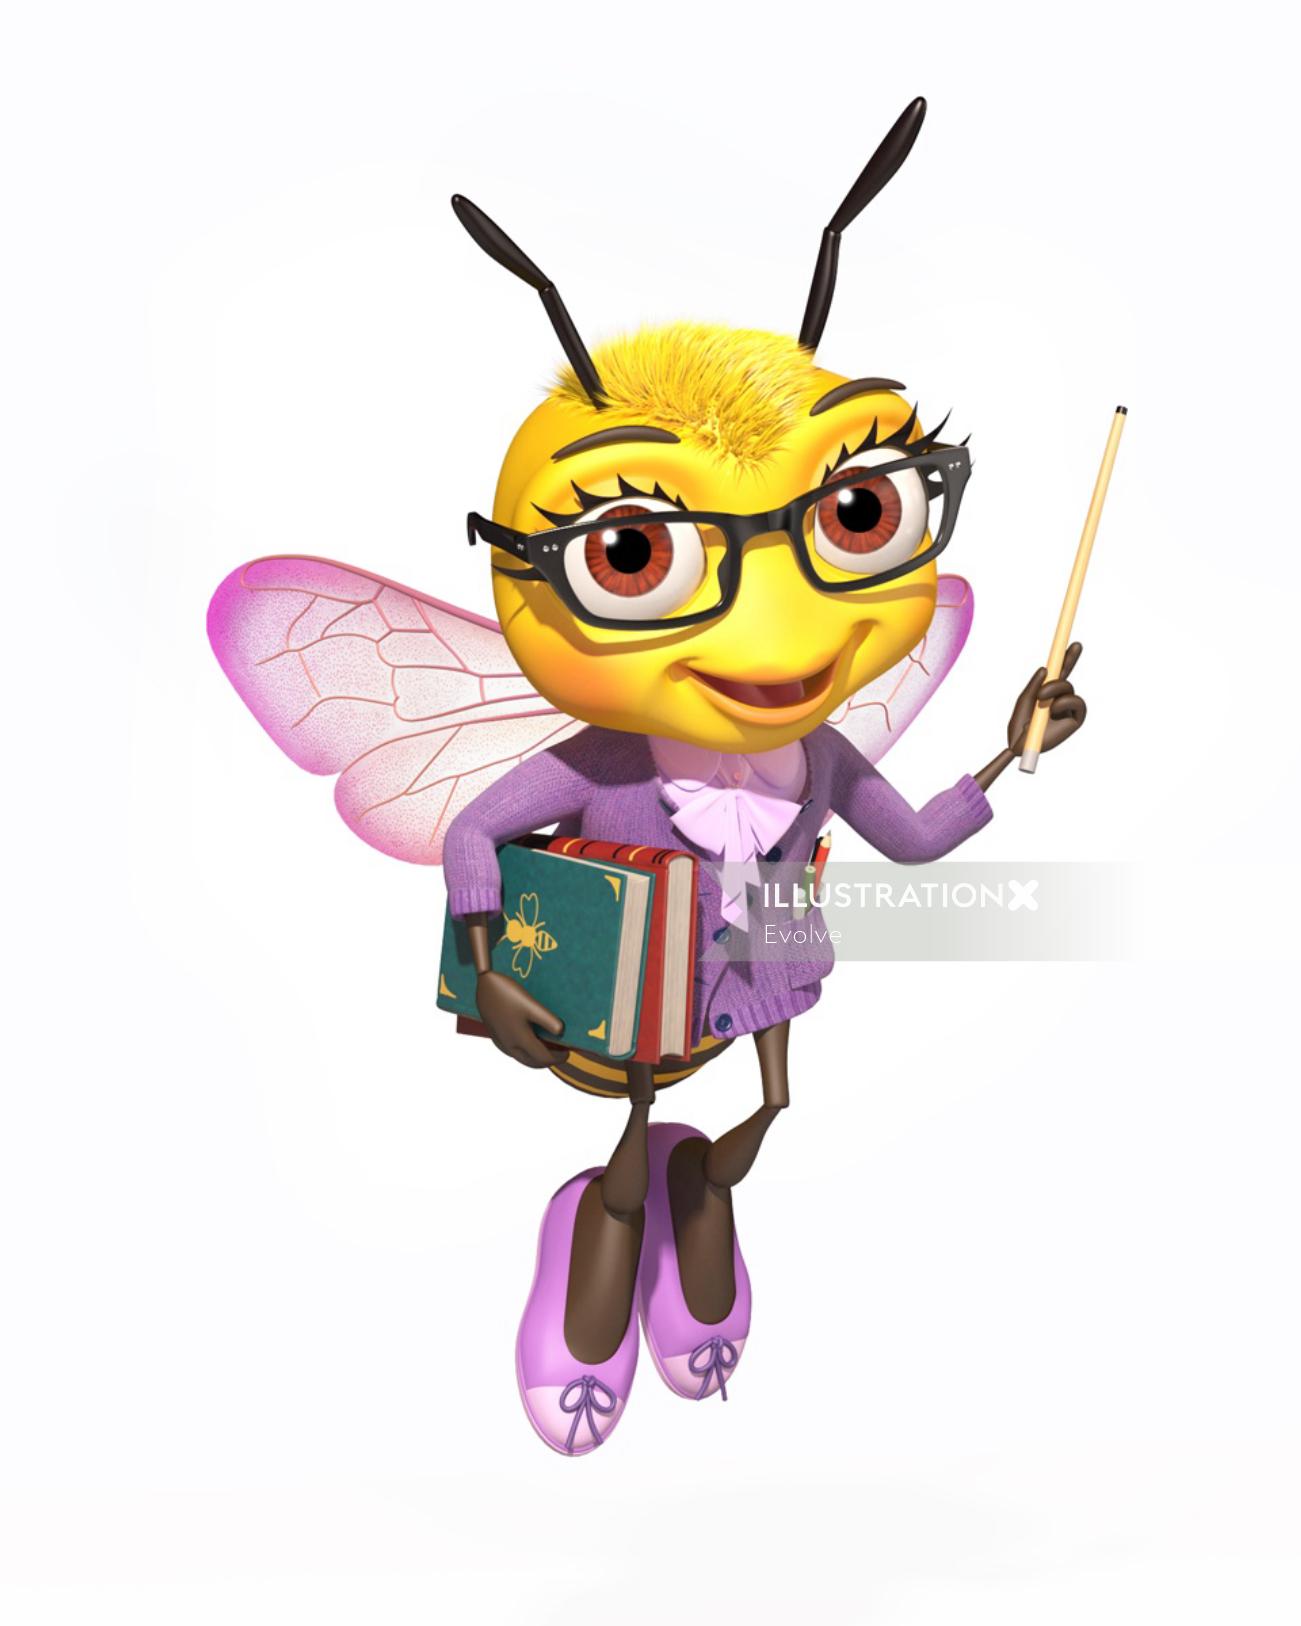 Lady bee holding books and pens painting